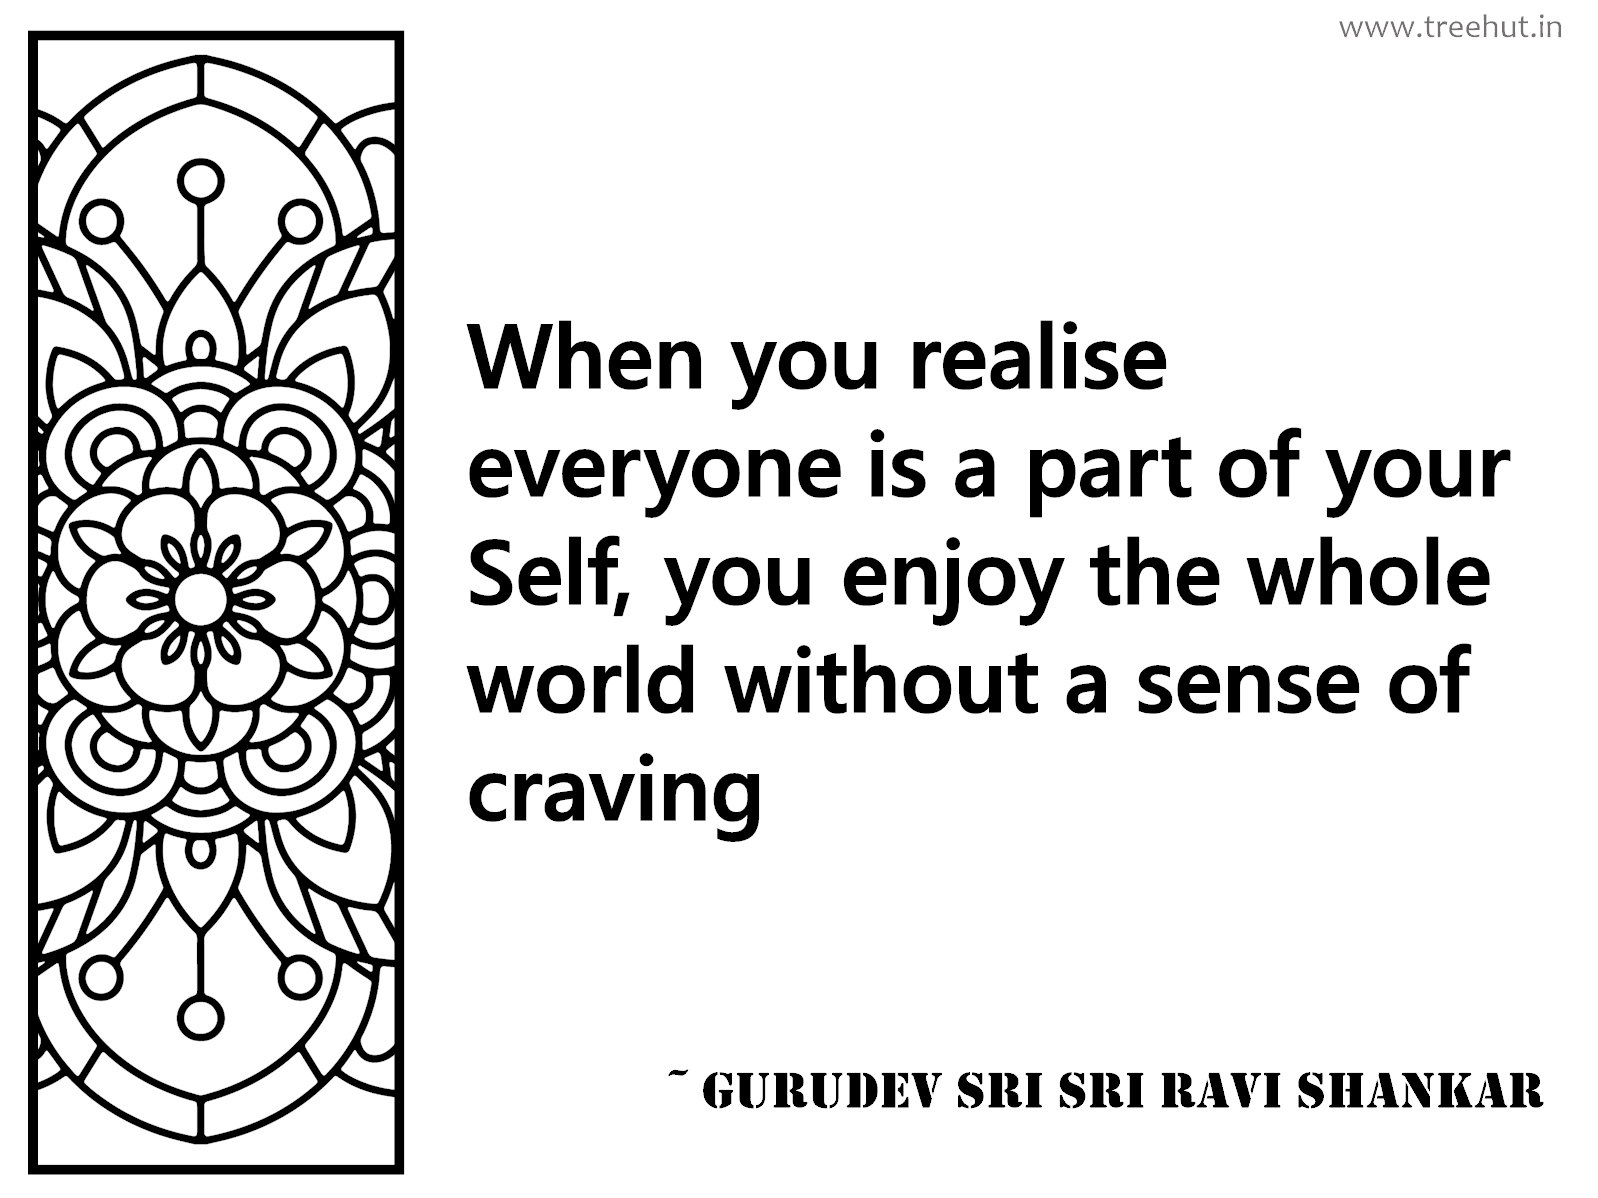 When you realise everyone is a part of your Self, you enjoy the whole world without a sense of craving Inspirational Quote by Gurudev Sri Sri Ravi Shankar, coloring pages